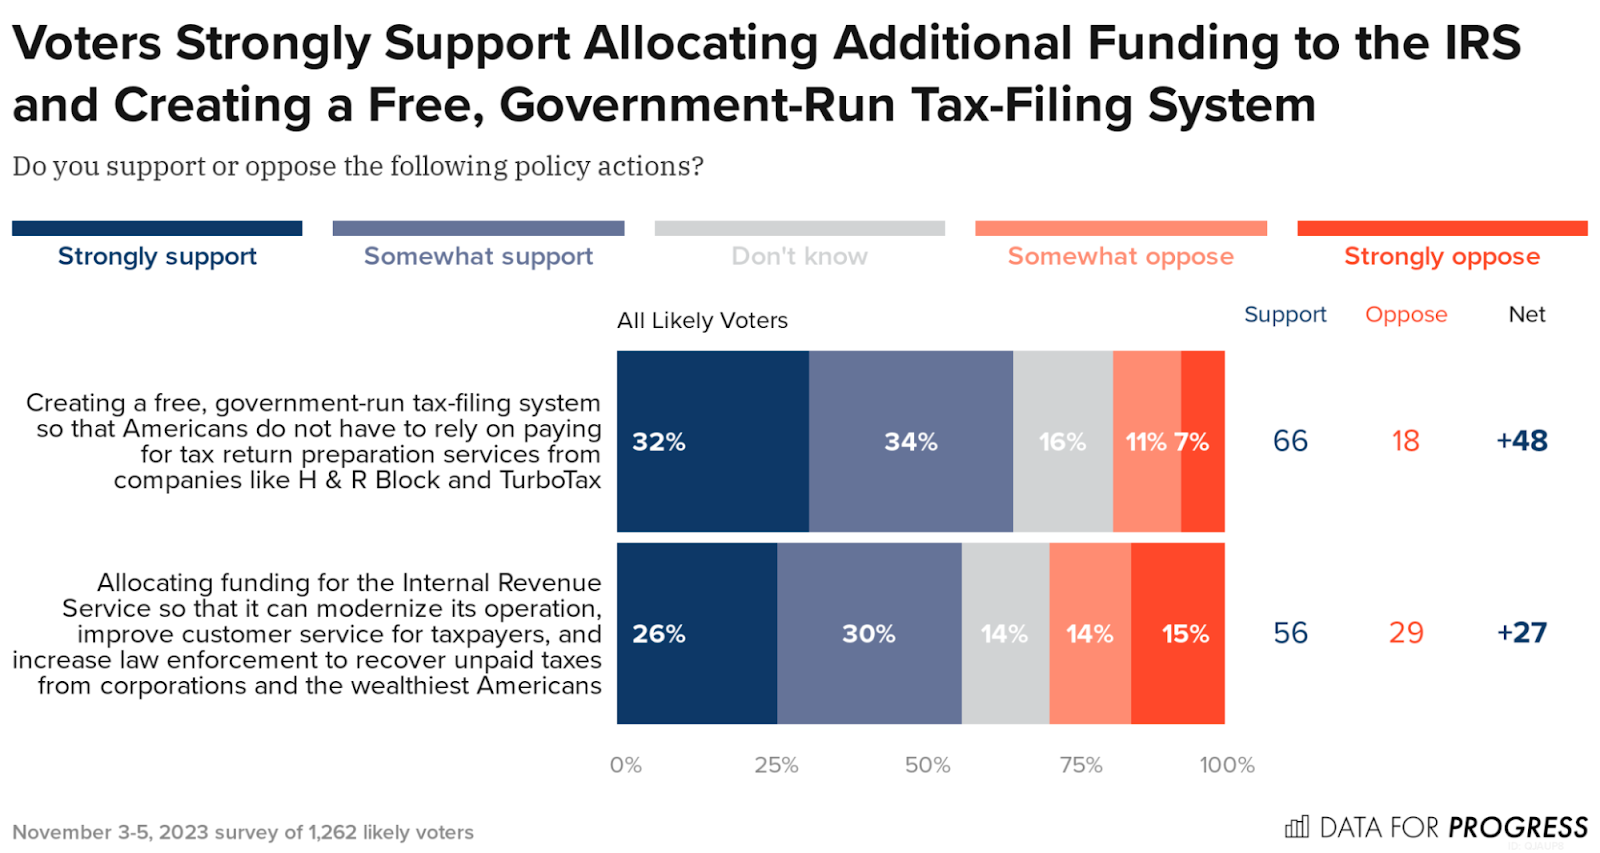 Voters strangely support allocating additional funding to the IRS and creating a free, government-run tax filing system